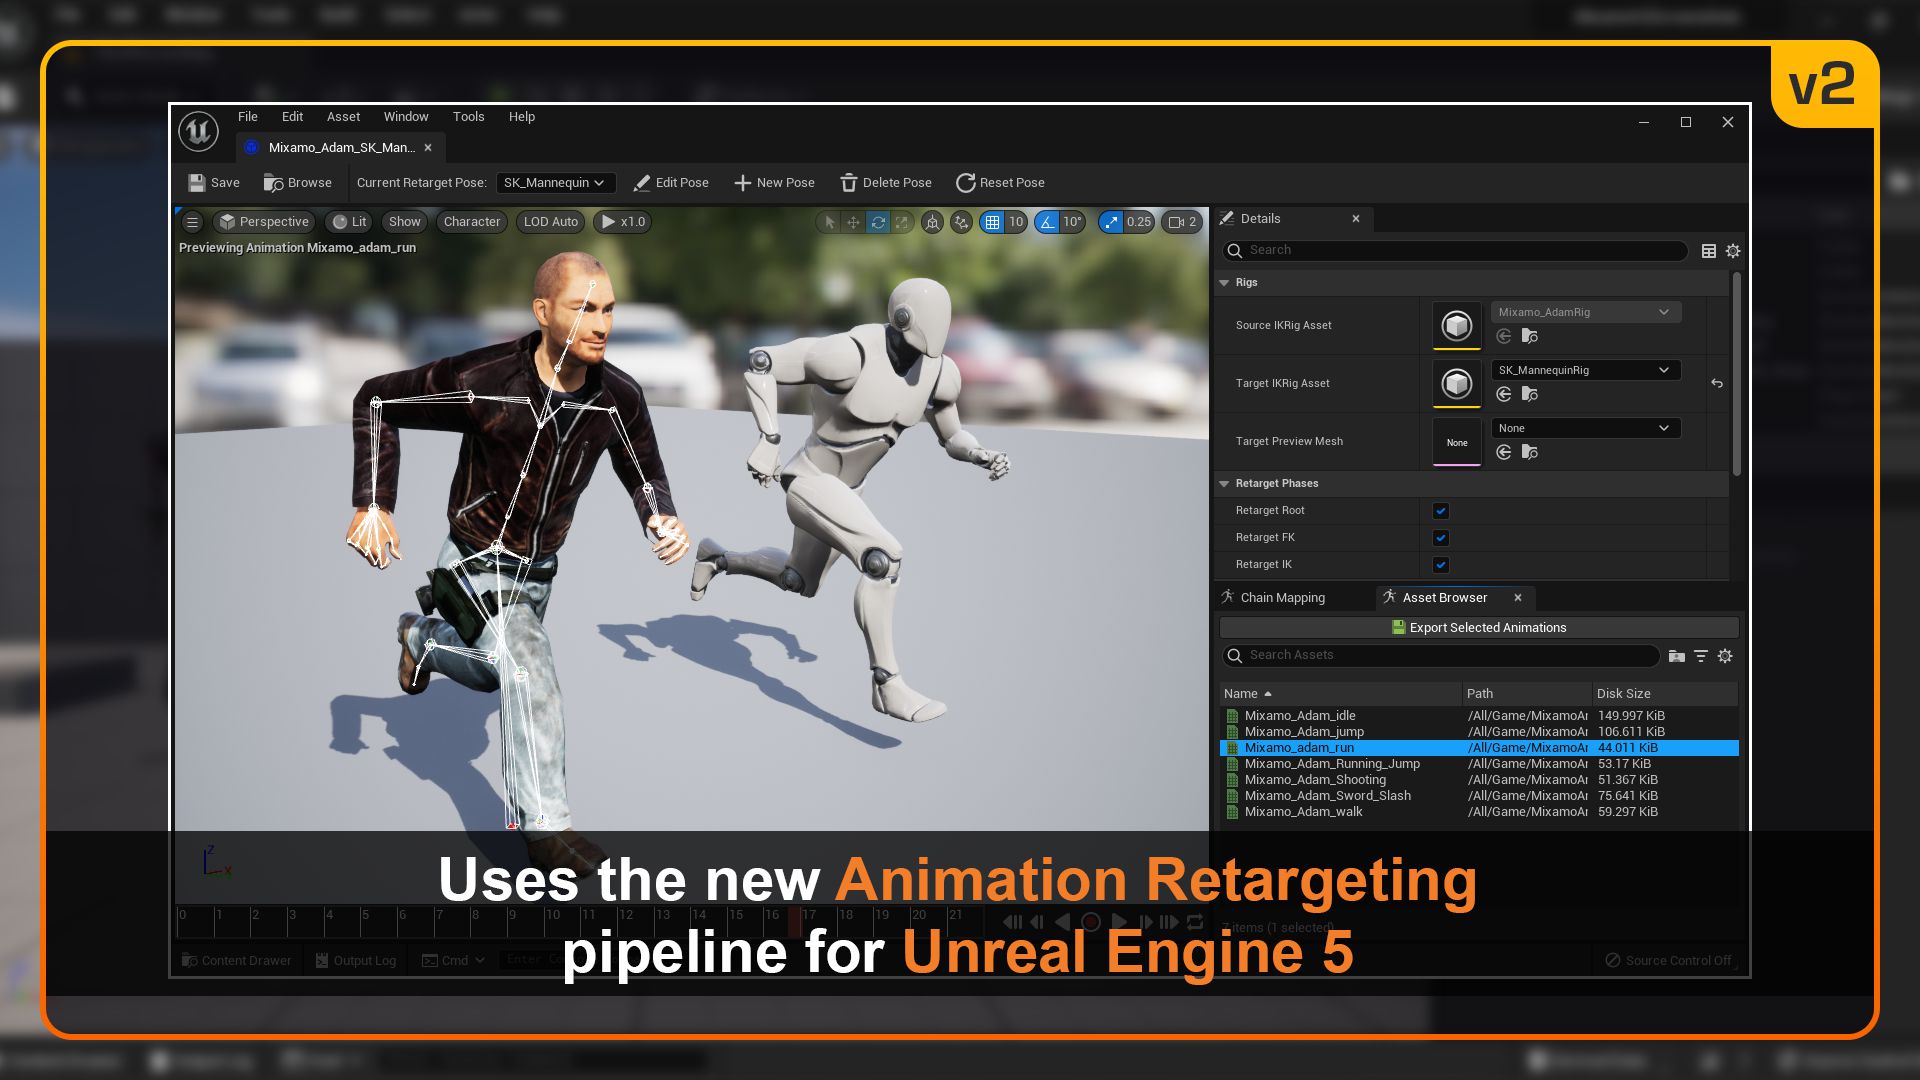 Uses the new Animation REtargeting pipeline for Unreal Engine 5